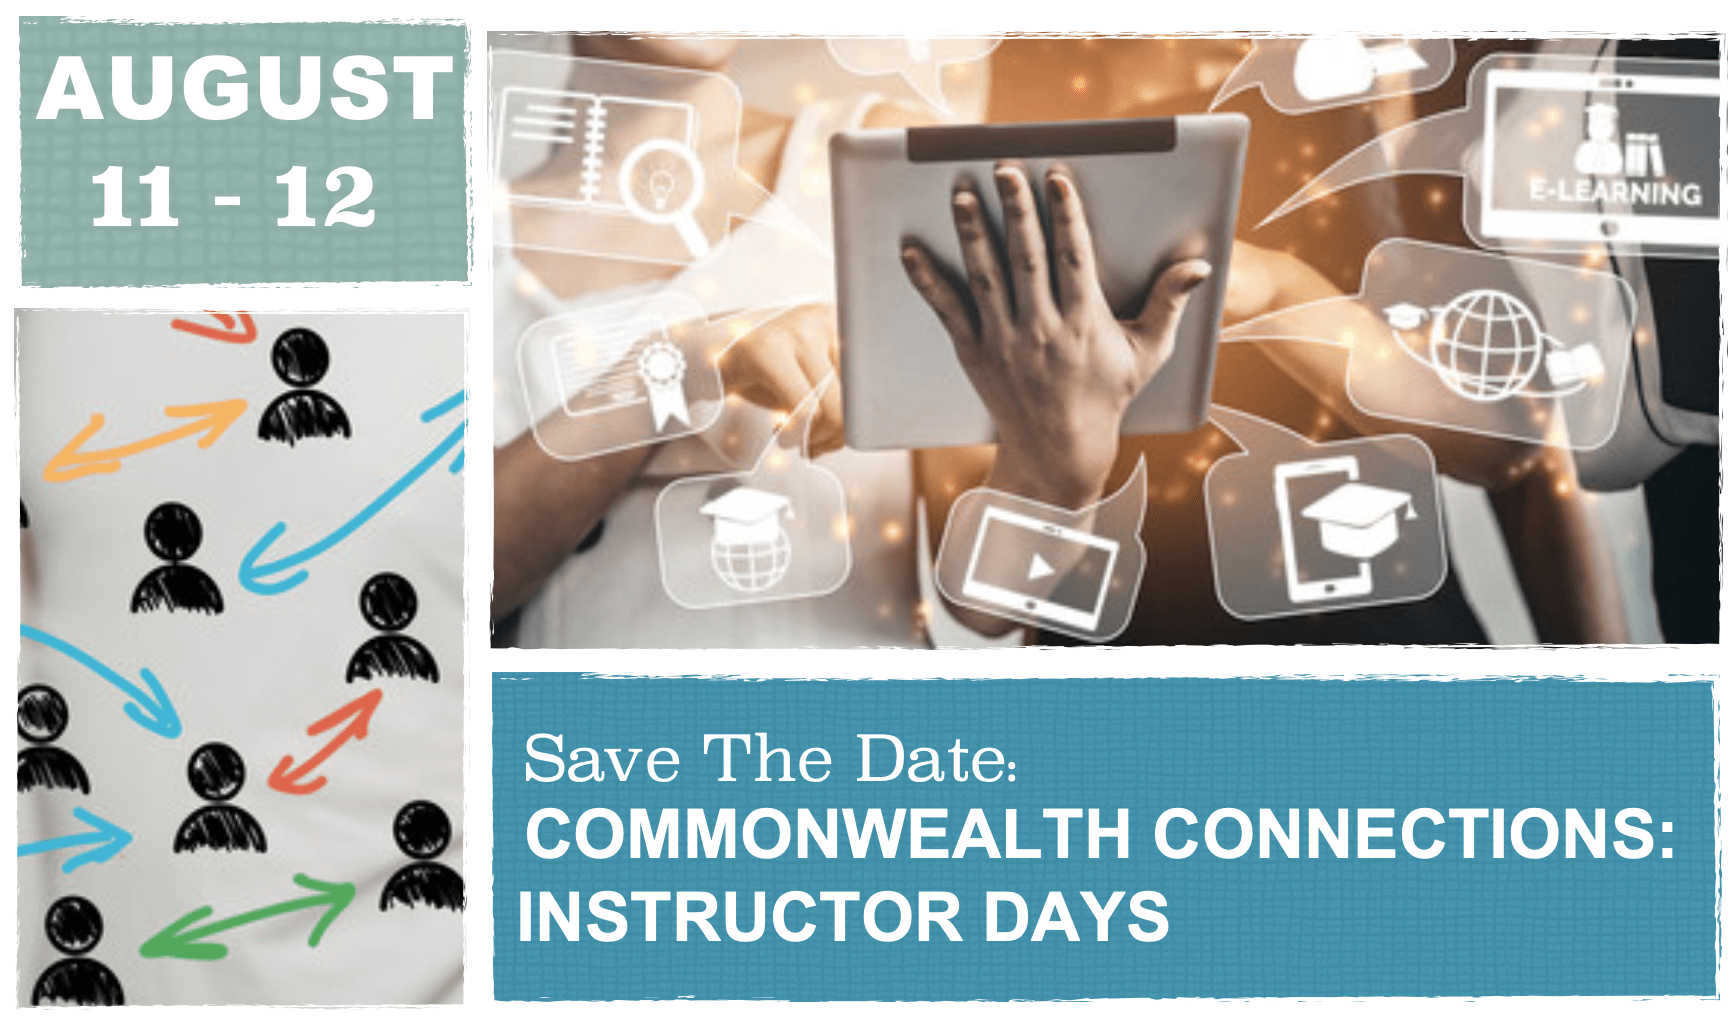 The Fall 2021 Commonwealth Connections Instructor Days will be August 11 and 12.